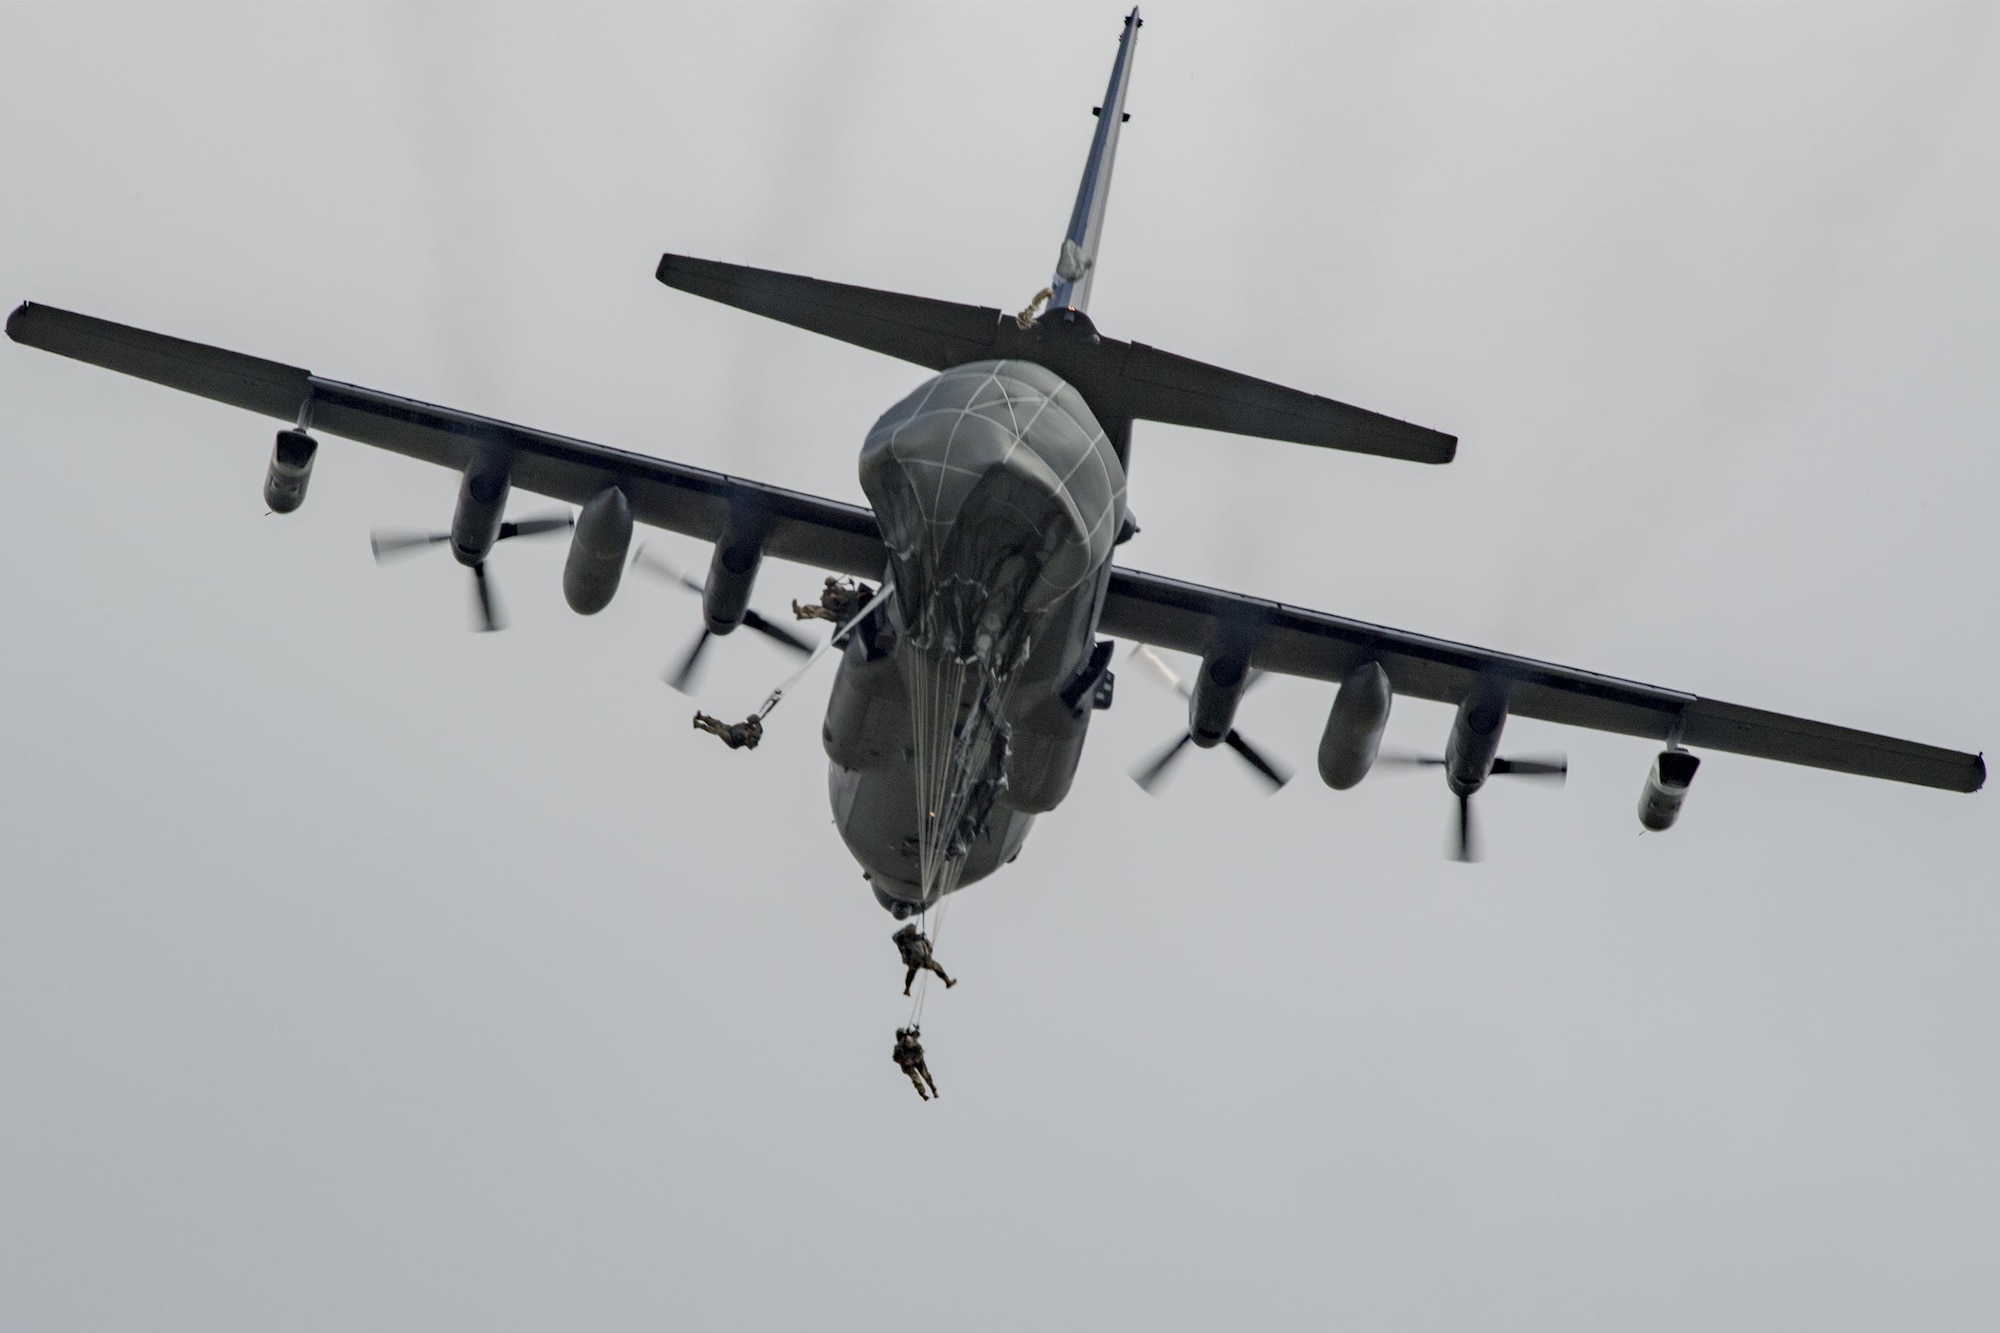 U.S. Air Force Airmen from the 823d Base Defense Squadron depart an MC-130H Combat Talon II during a static-line jump, Sept. 16, 2016, at the Lee Fulp drop zone in Tifton, Ga. The majority of the 823d is security forces members trained to deploy and protect. (U.S. Air Force photo by Airman 1st Class Daniel Snider)